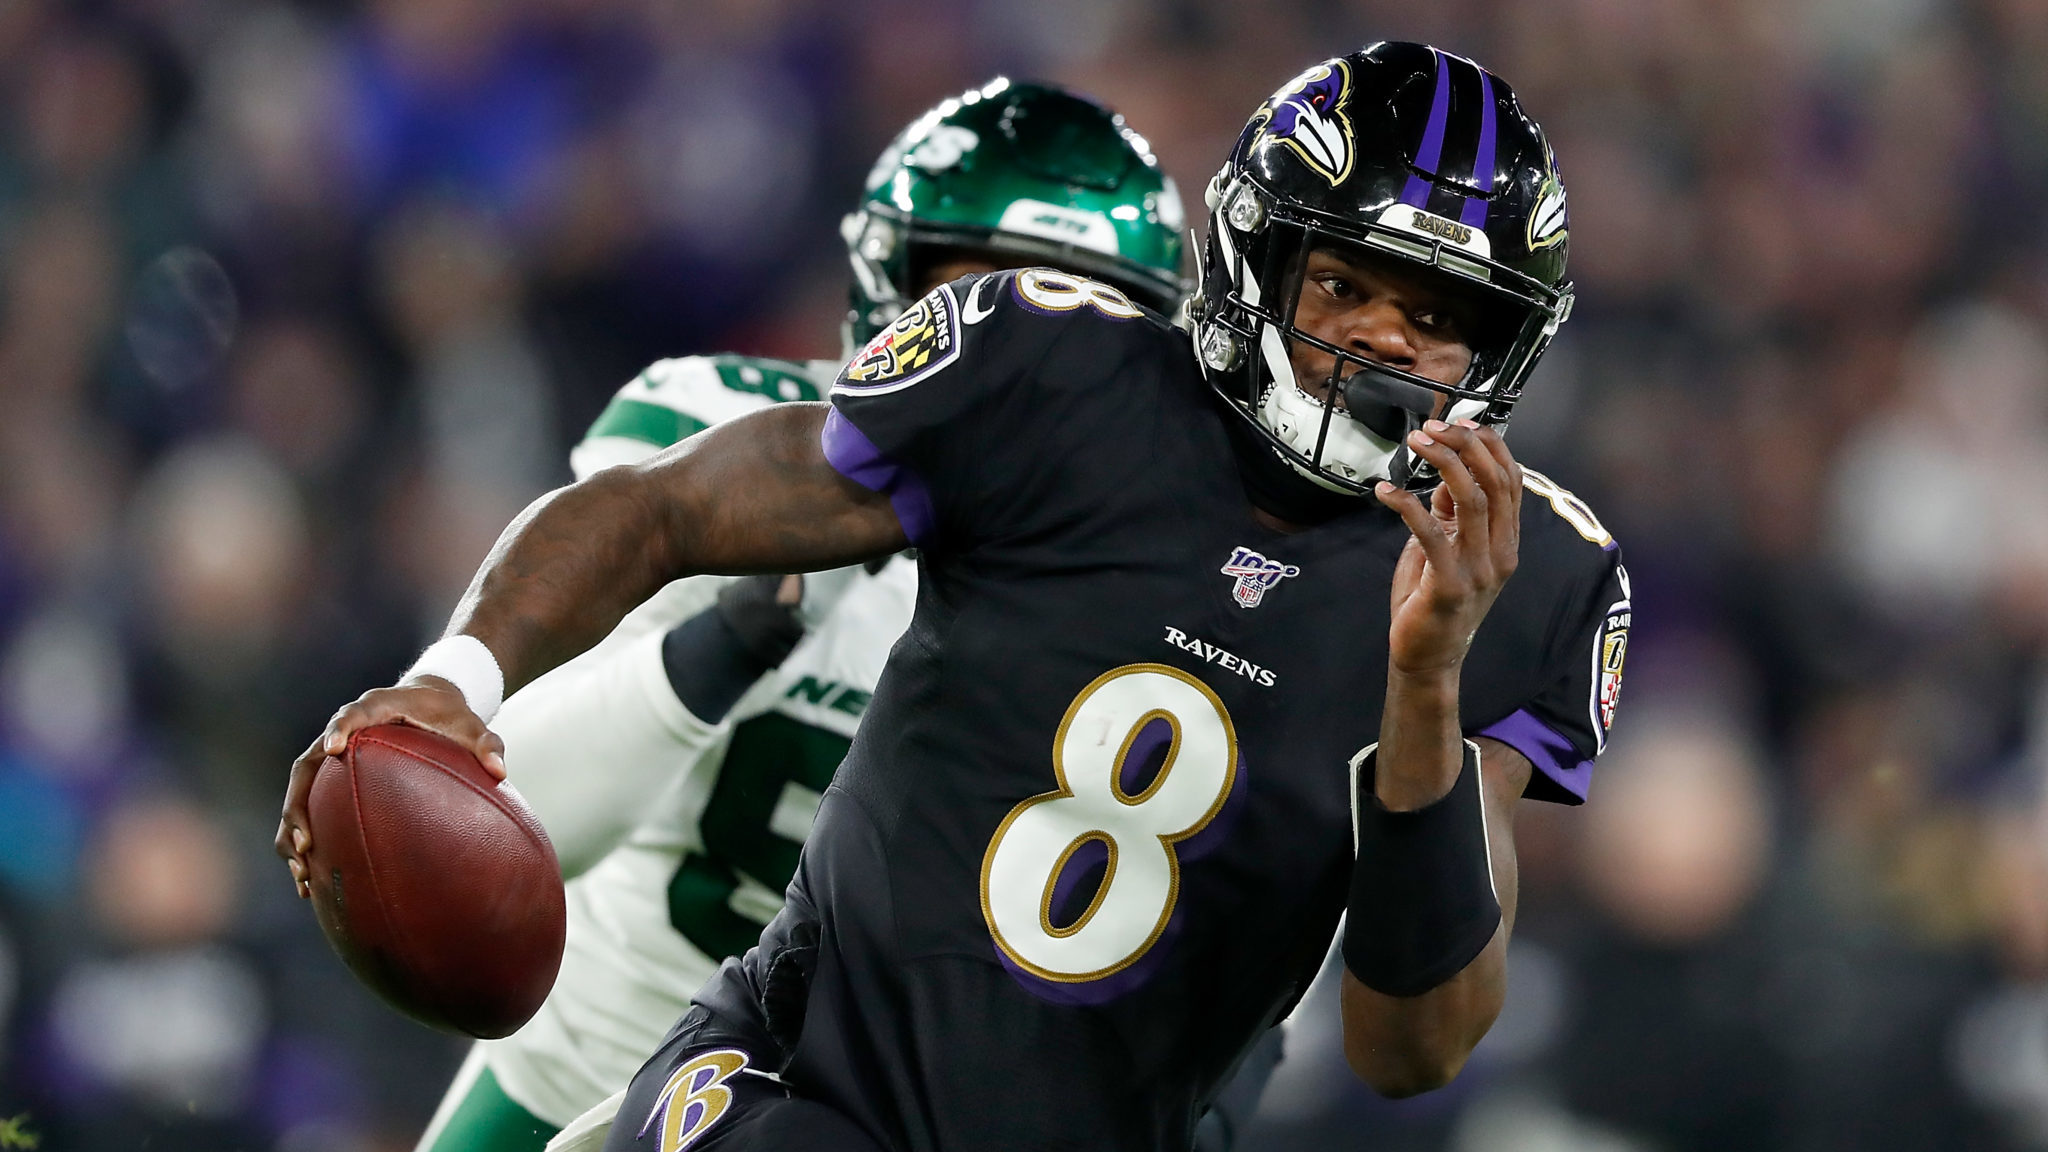 NFL Week 1: New York Jets lose to the Baltimore Ravens 